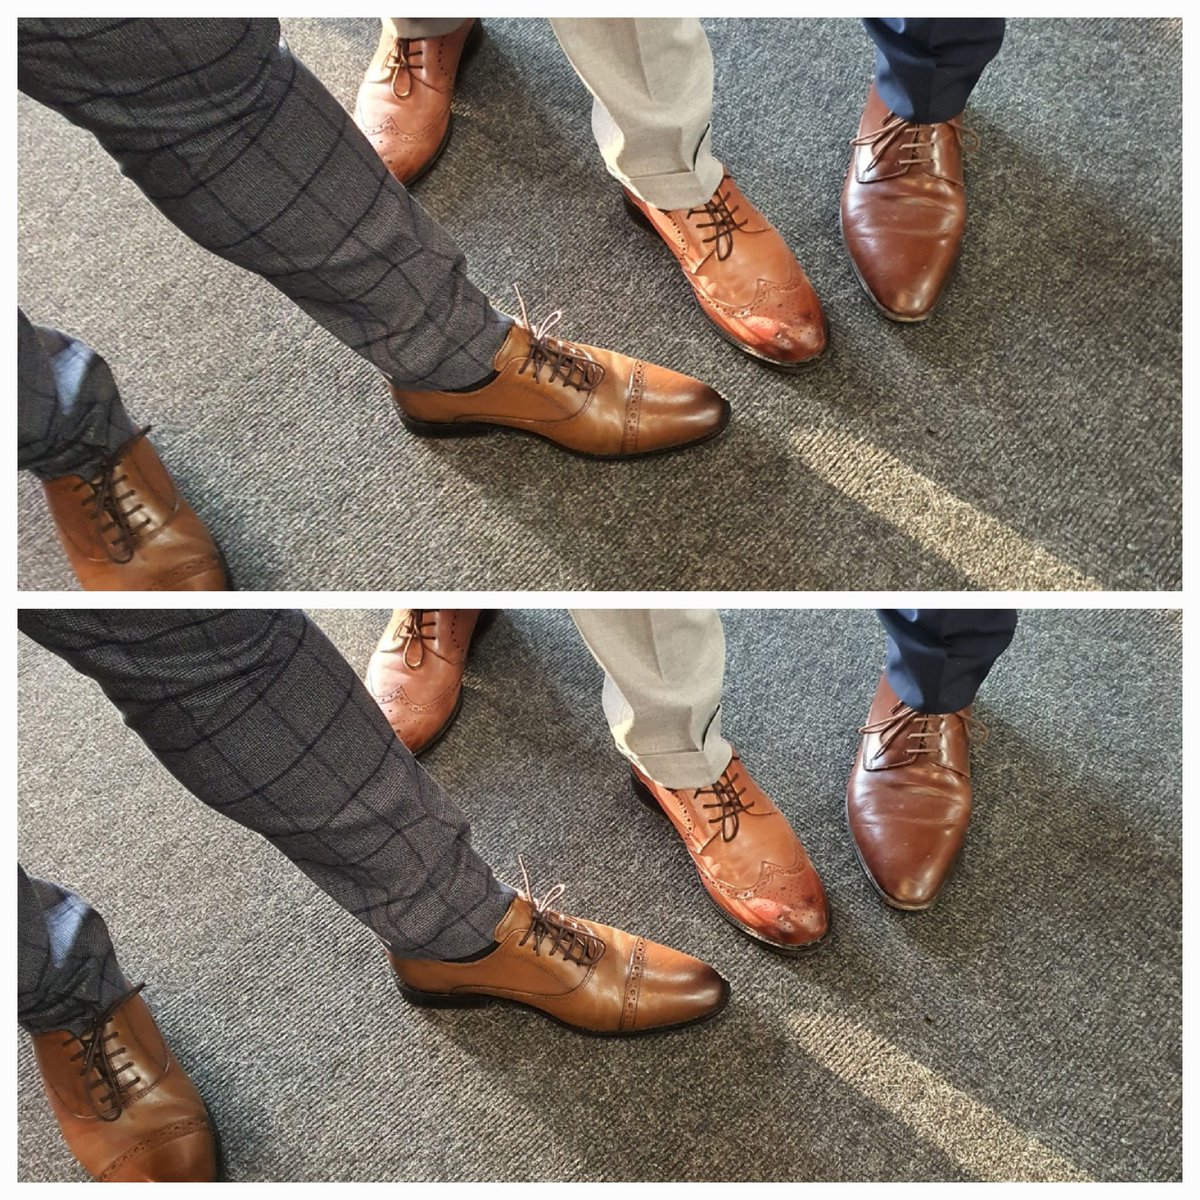 Sometimes it's the simple things that bring a smile 😁. Any guesses as to whom these feet belong @ChallneyBoys? Let's narrow it to one of our #assemblies. Happy Sunday Everyone 🤗